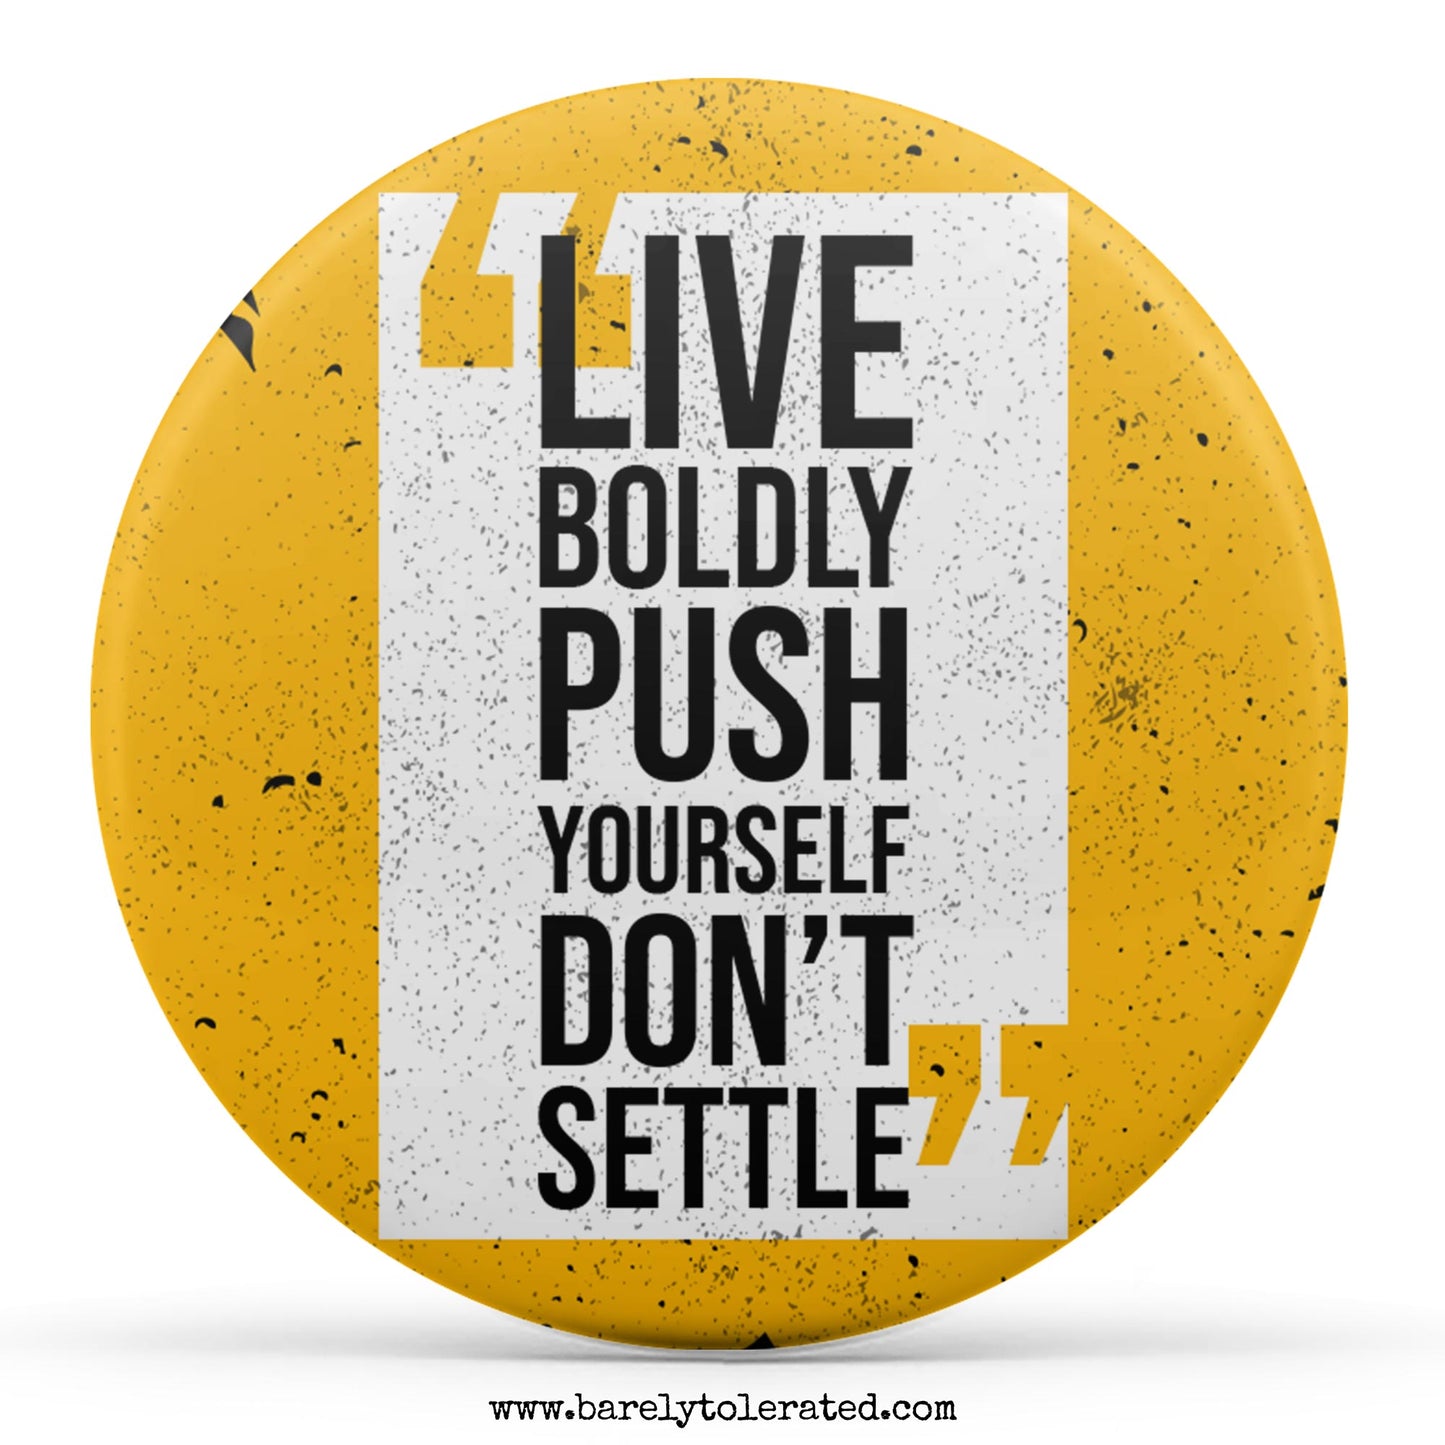 Live Boldly, Push Yourself, Don't Settle